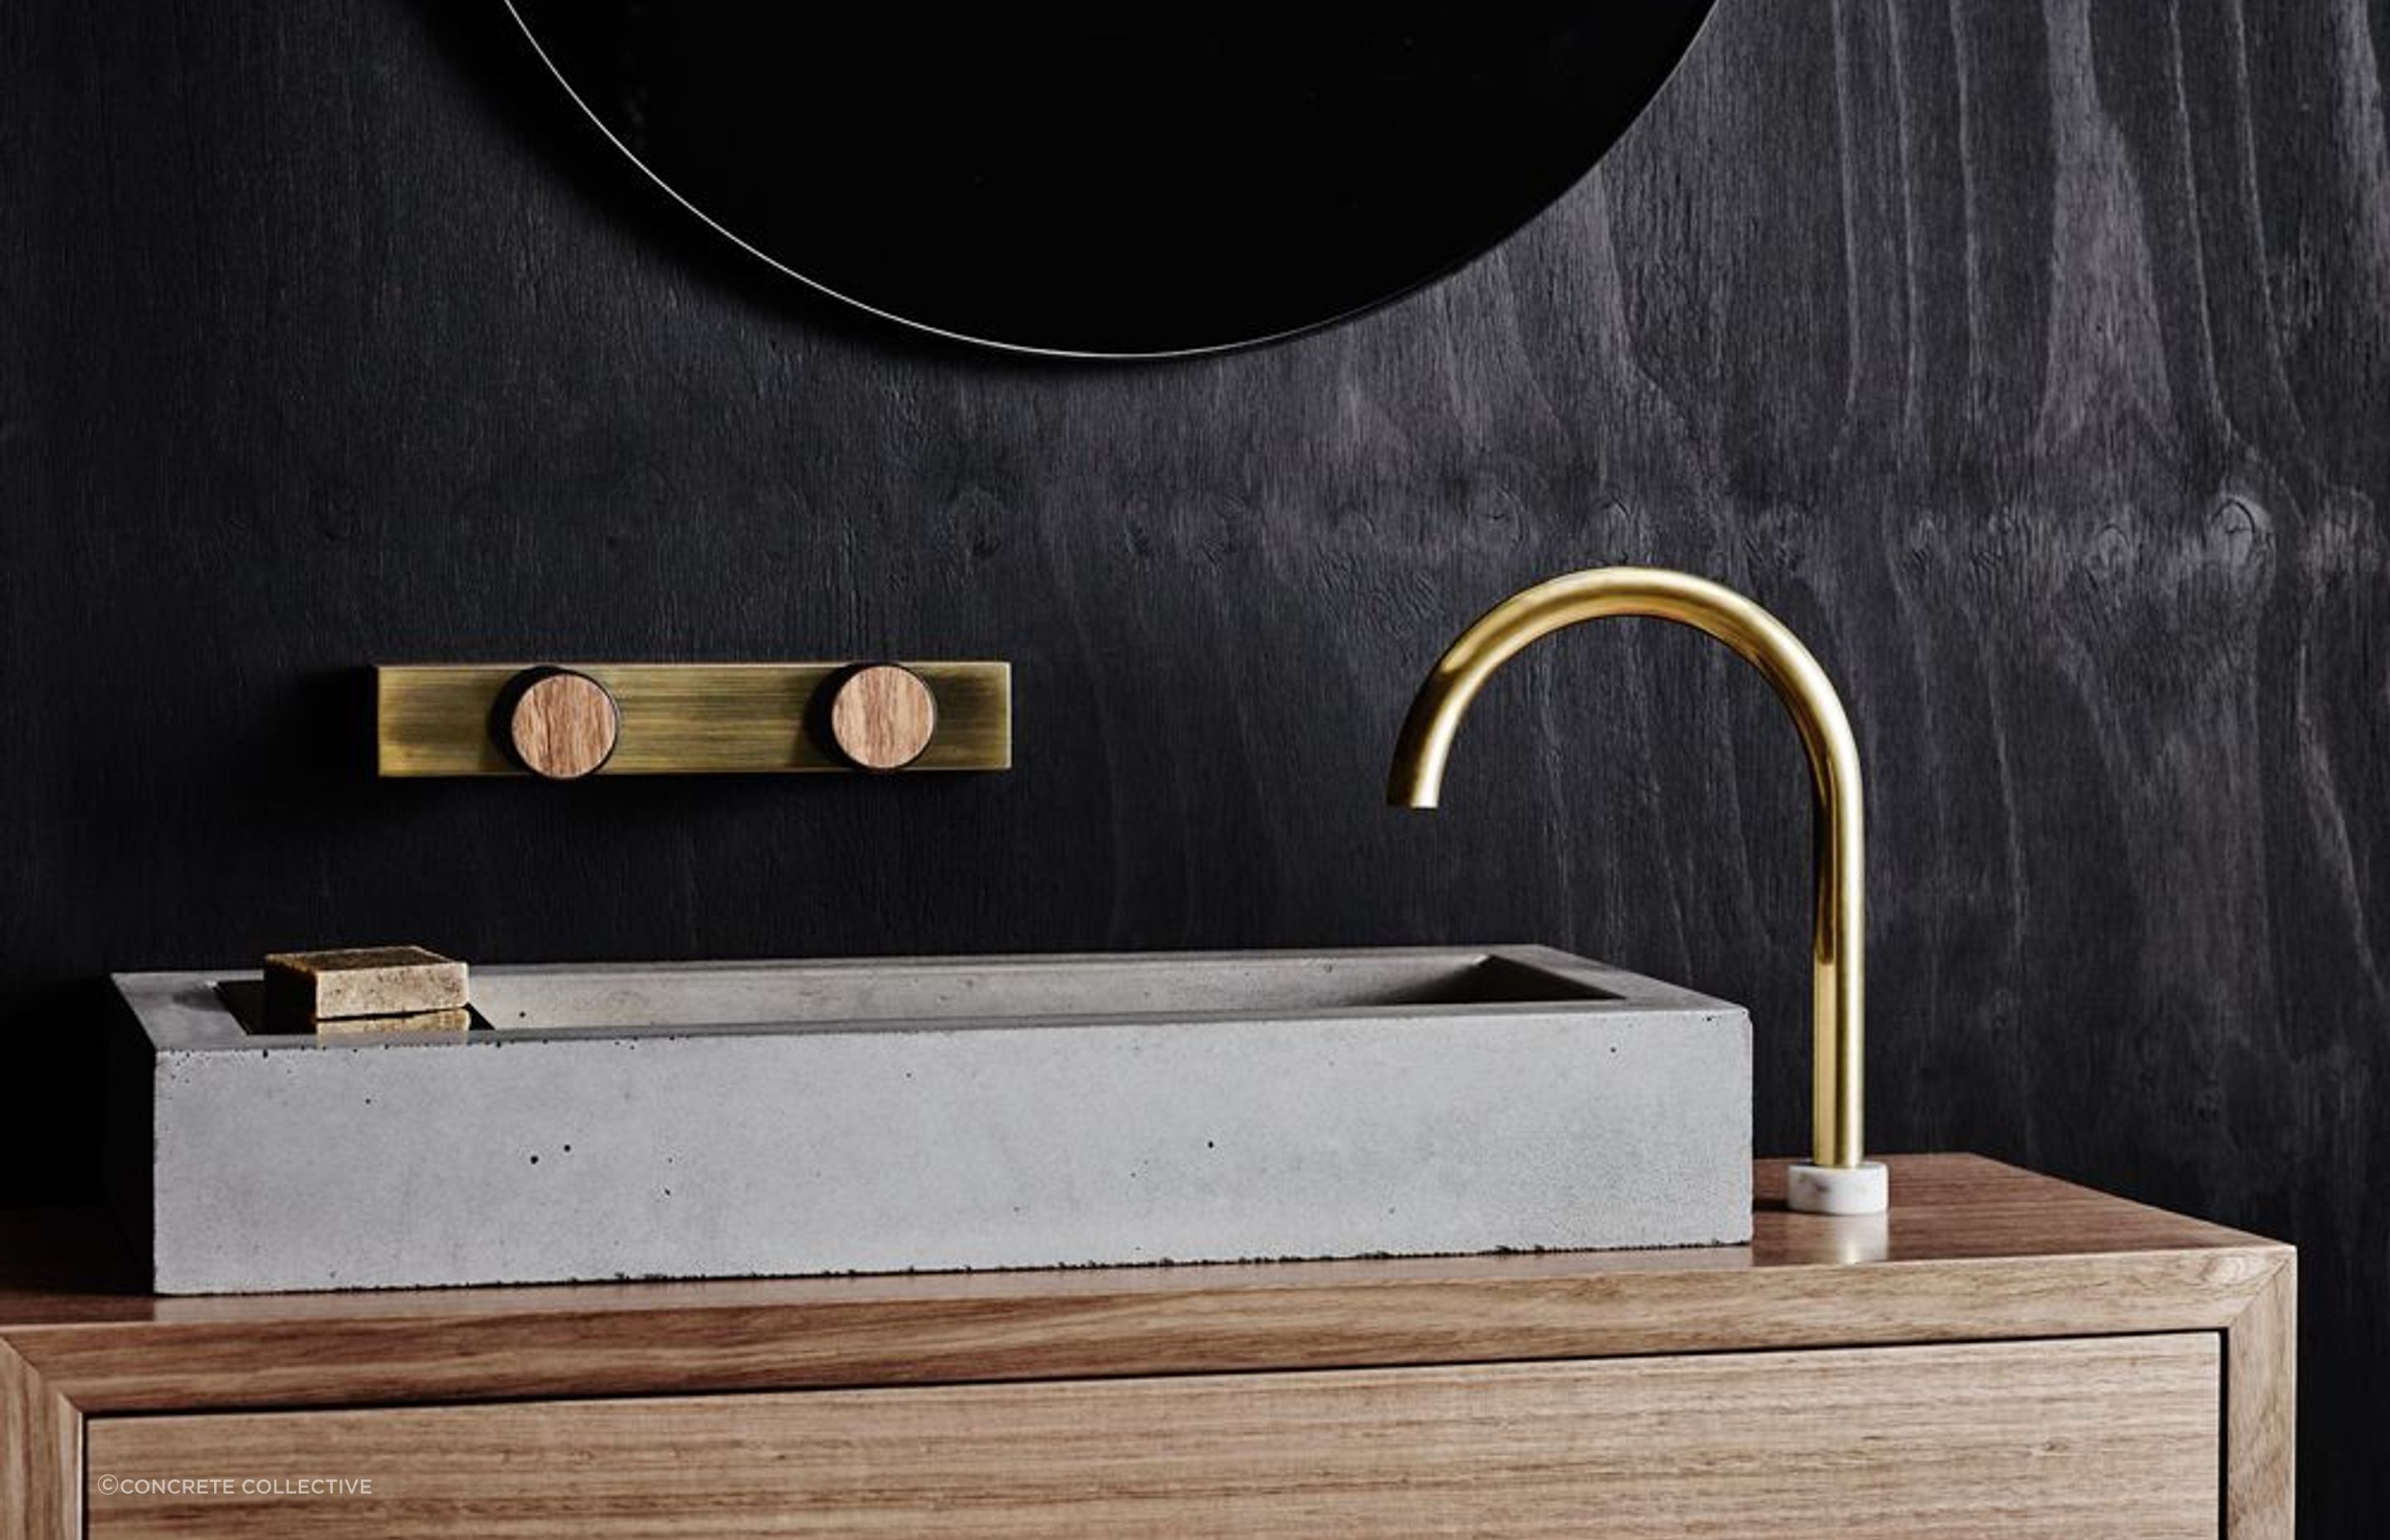 The ingenious hybrid material Wood Melbourne Leo Round Brass &amp; Timber Taps